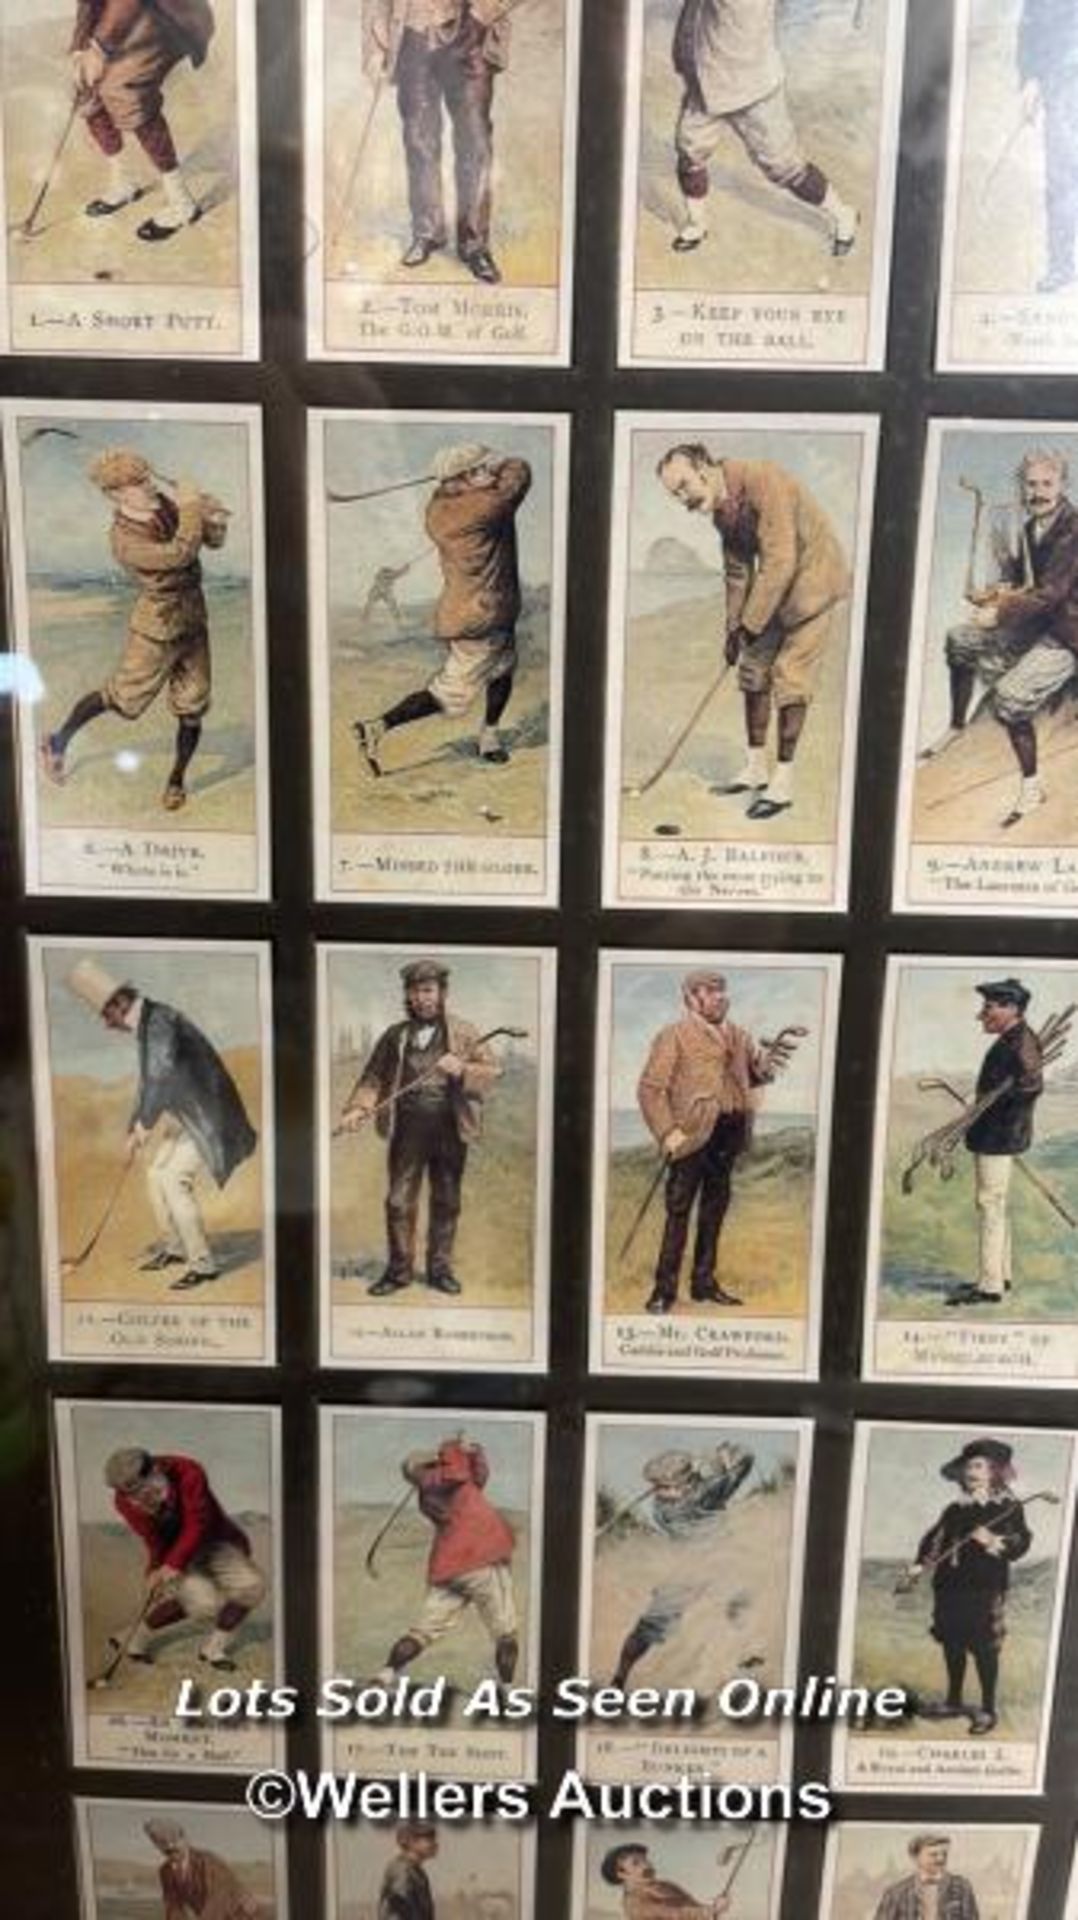 COPE'S BROS & CO LTD SET OF 50 CIGARETTE CARDS, COPE'S GOLFERS, FRAMED AS TWO - Image 2 of 6